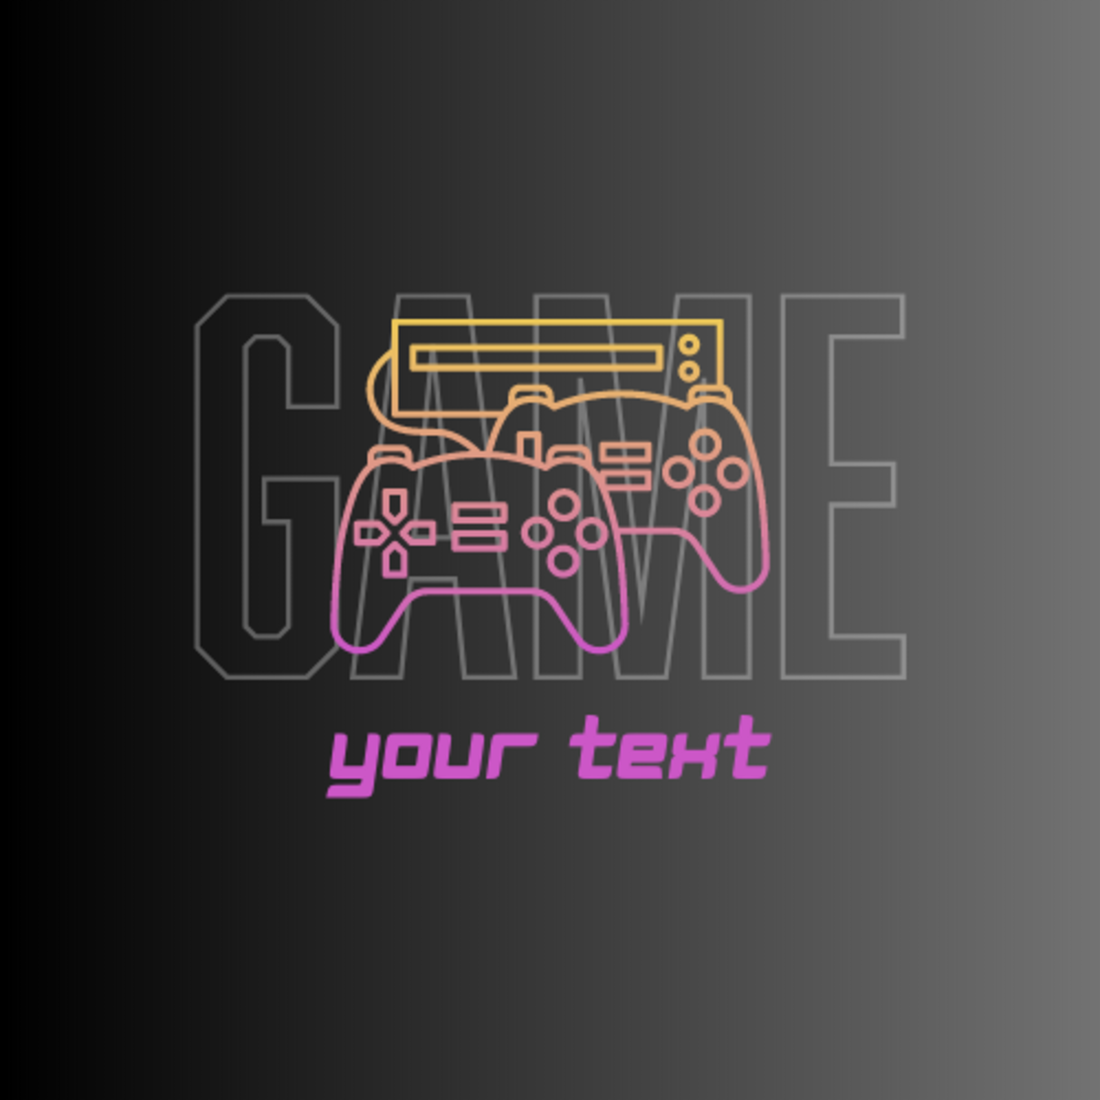 Video game logo with a video game controller.